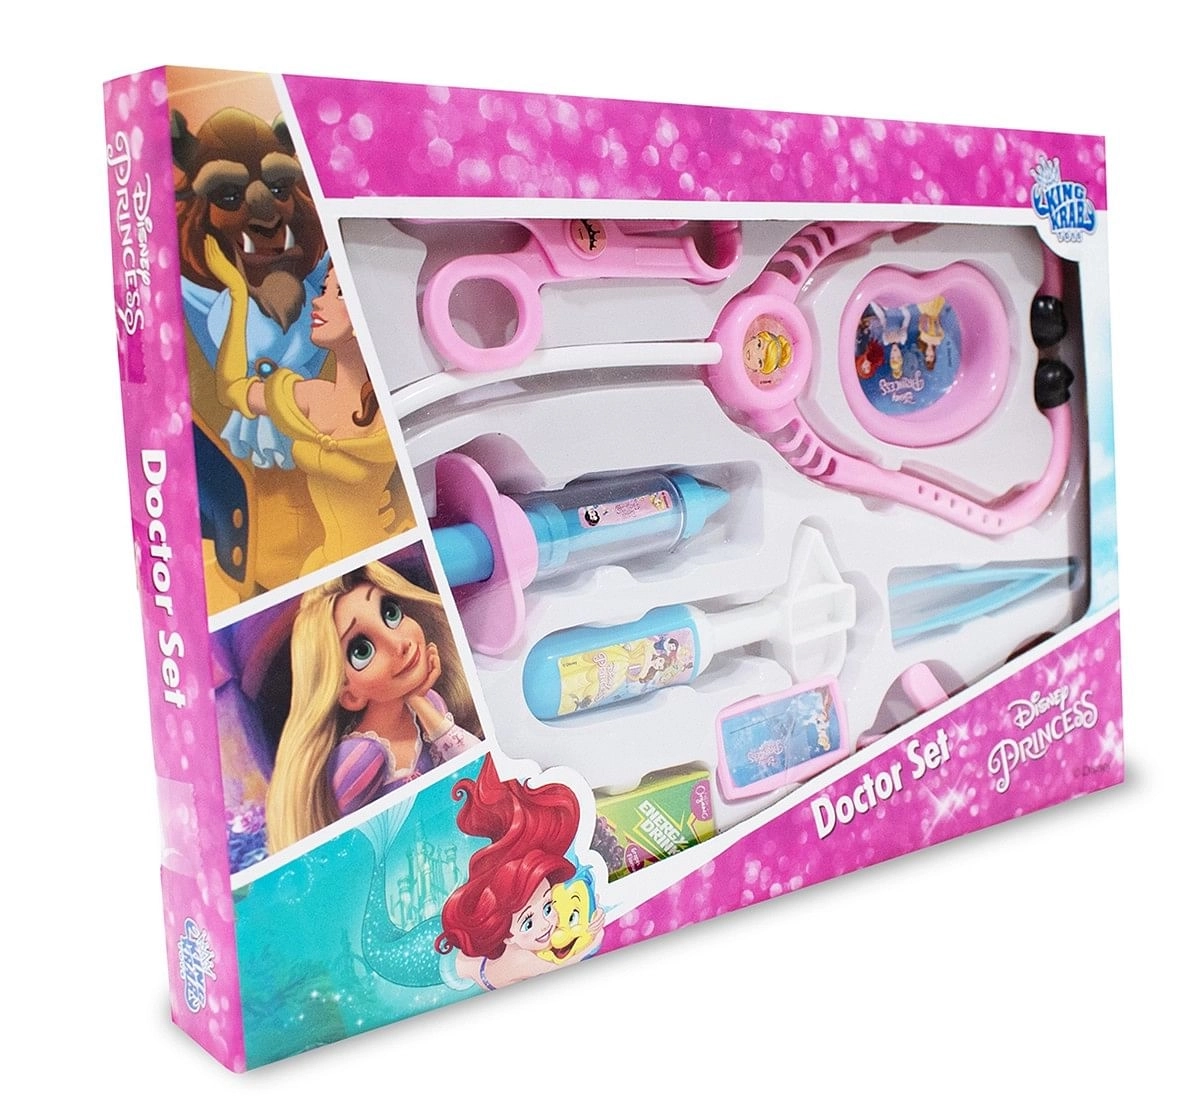 Disney Princess Doctor Set Role play toys for kids, 3Y+